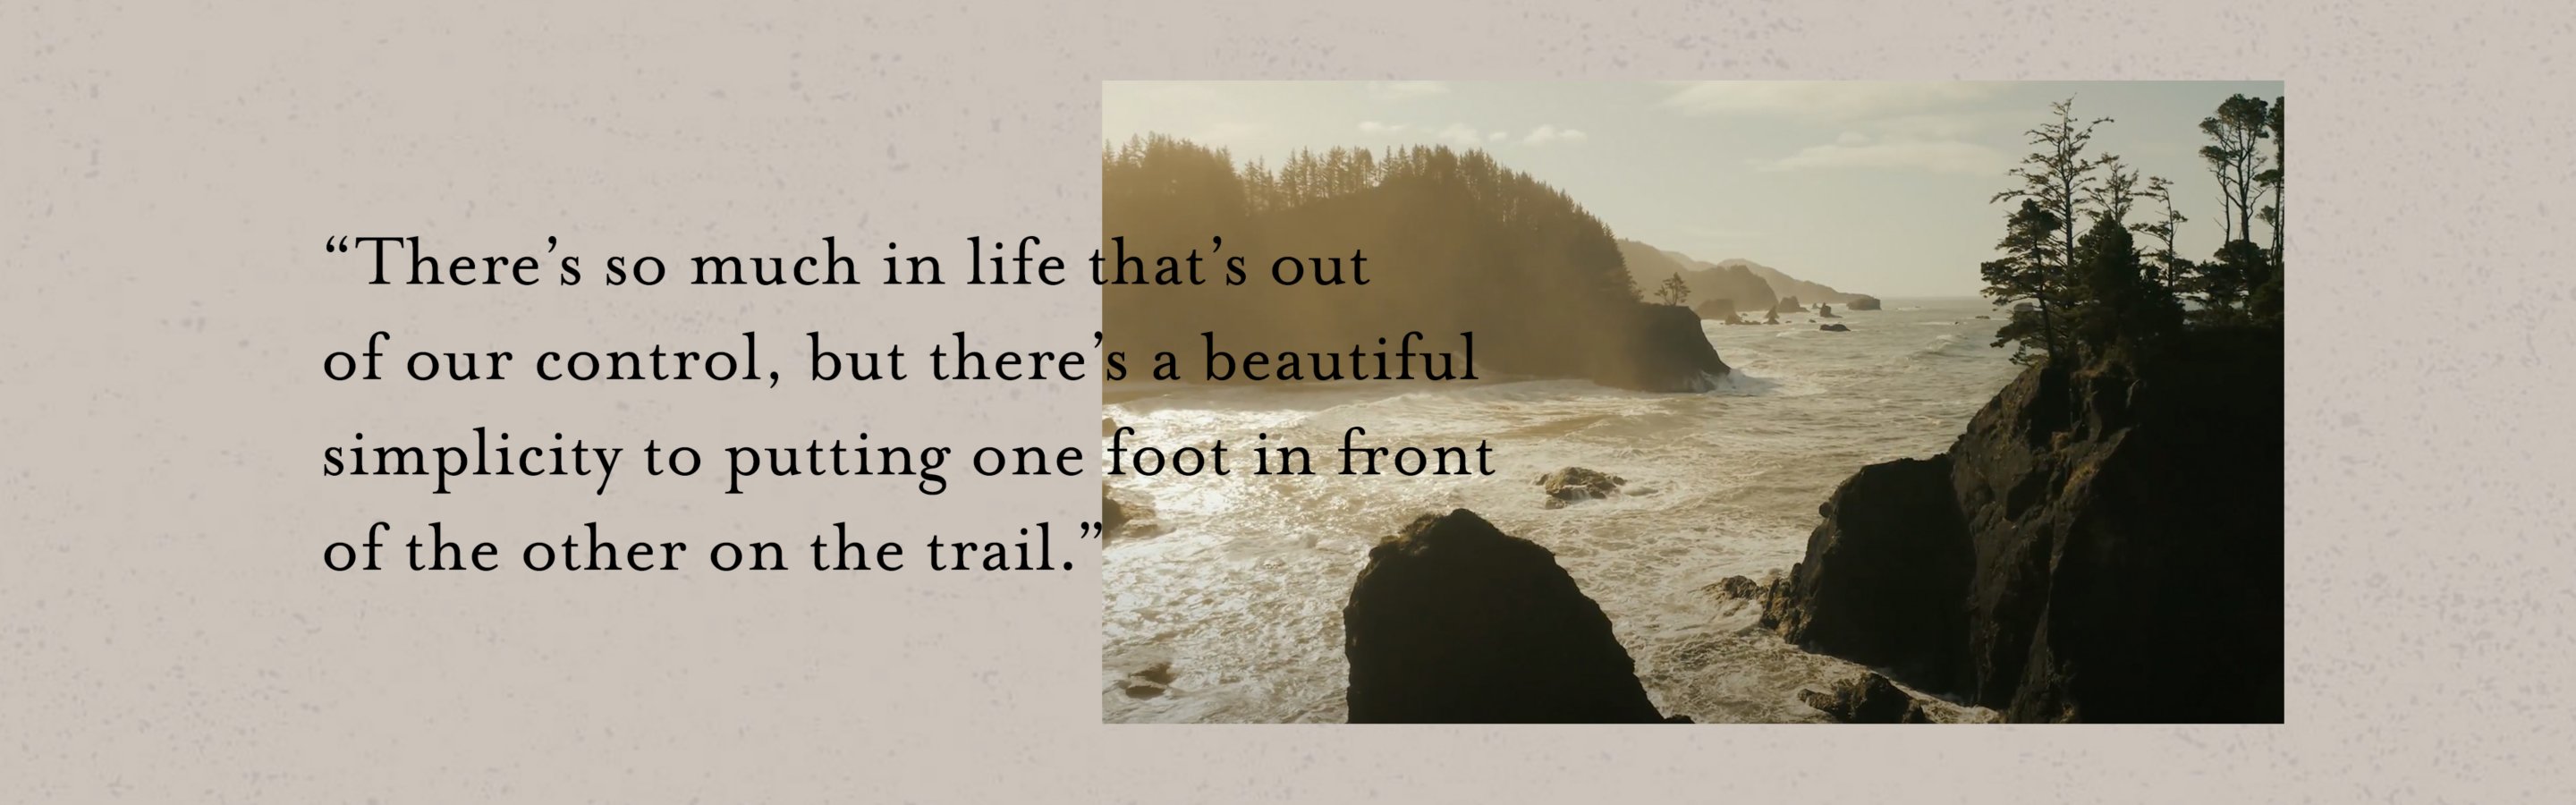 There's so much in life that's out of our control, but there's a beautiful simplicity to putting one foot in front of the other on the trail.